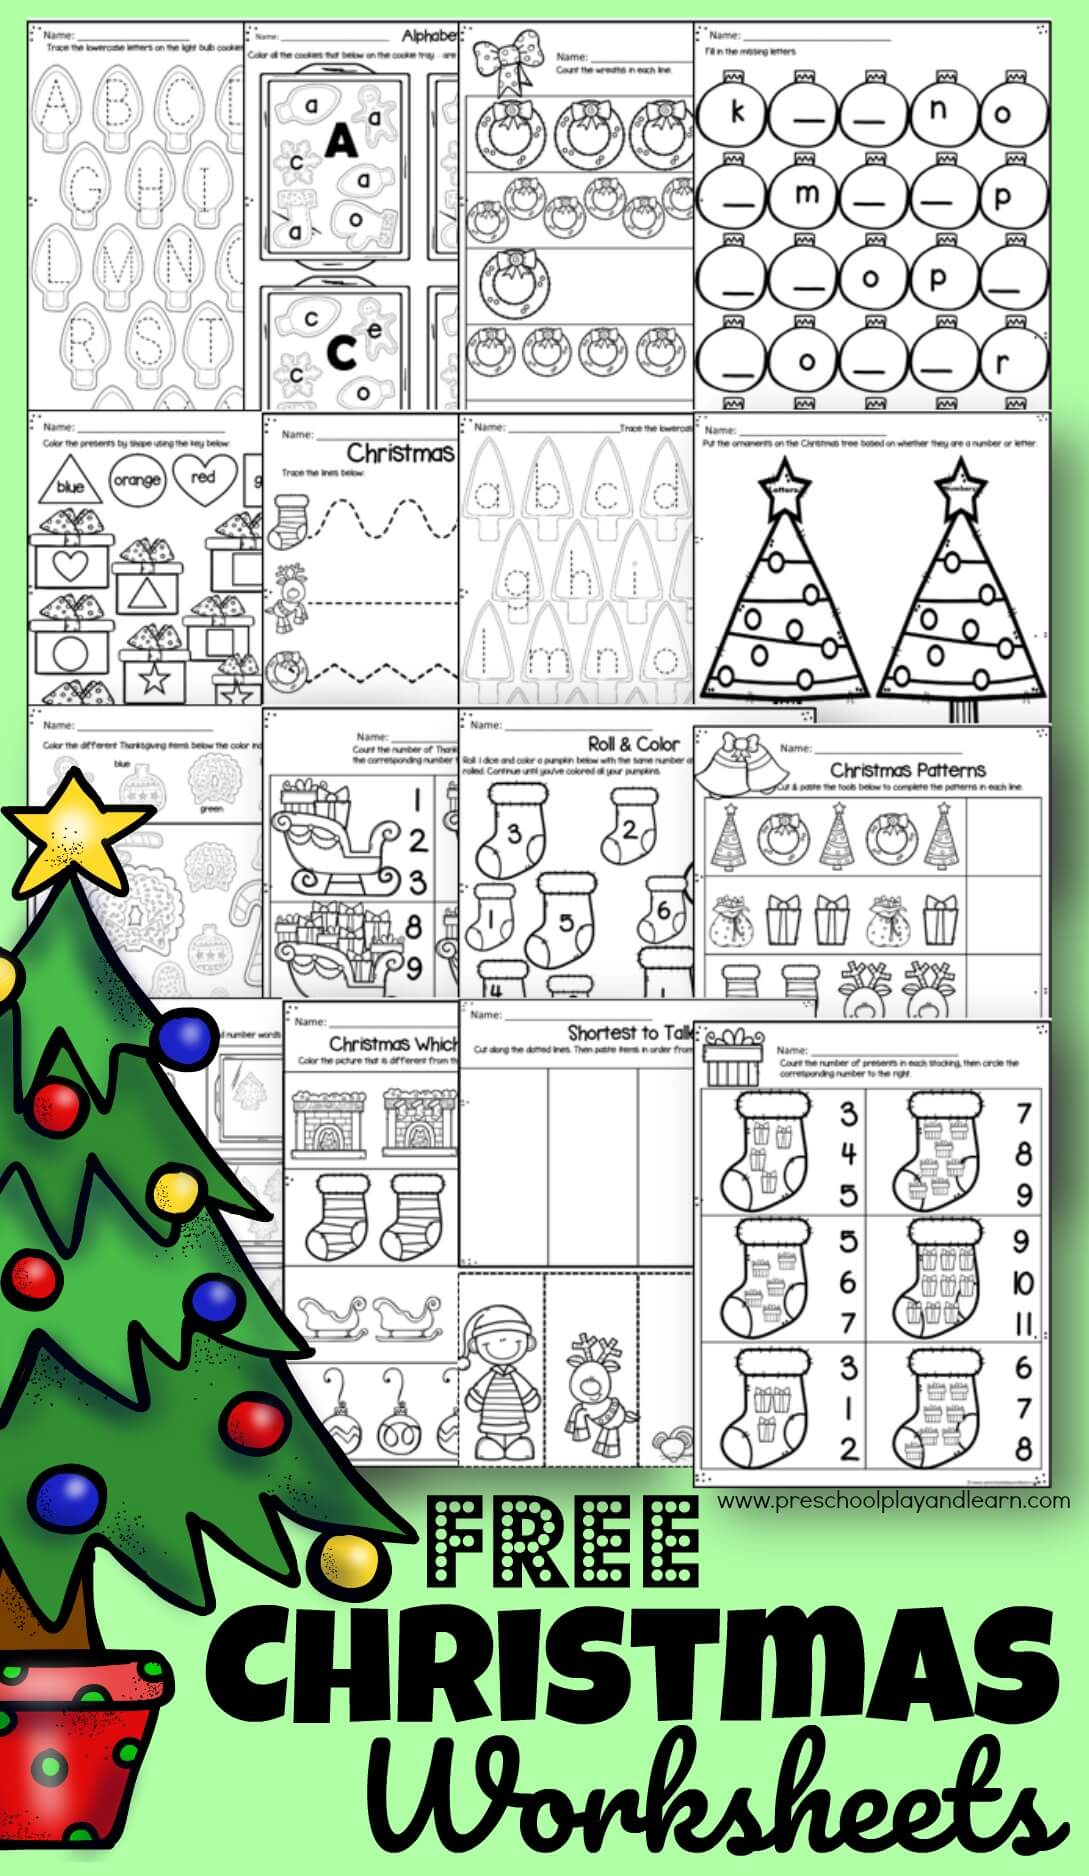 christmas-spot-the-difference-worksheet-free-printable-digital-pdf